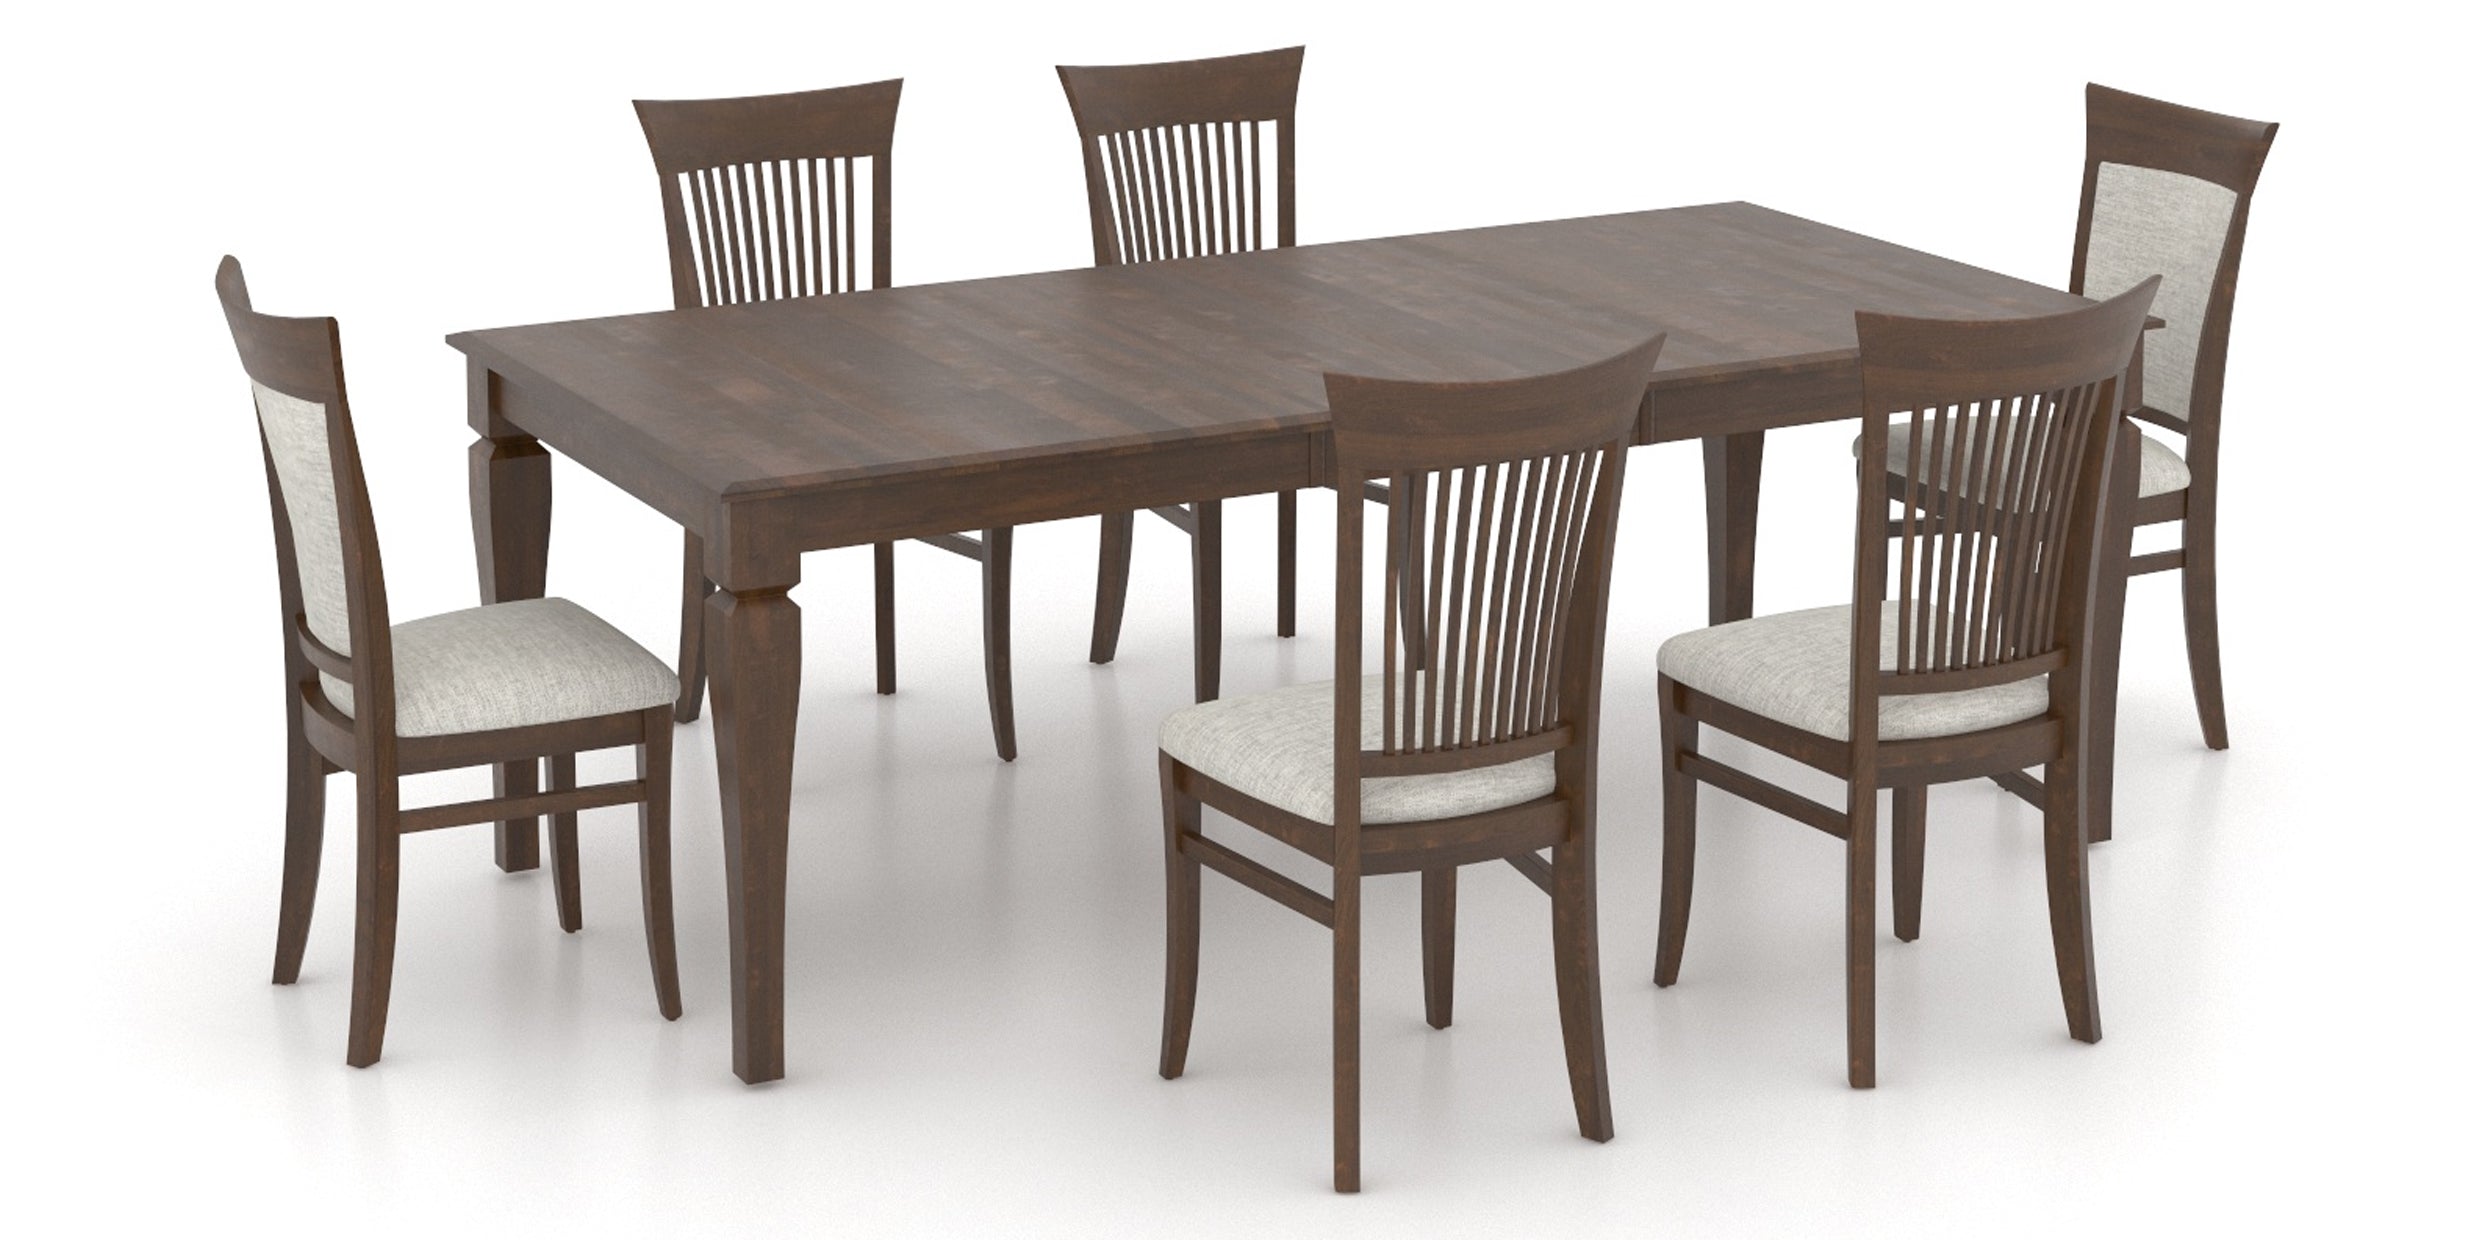 Cognac Washed Birch with Matte Finish and AC Fabric | Canadel Core 4268 PB Dining Set | Valley Ridge Furniture